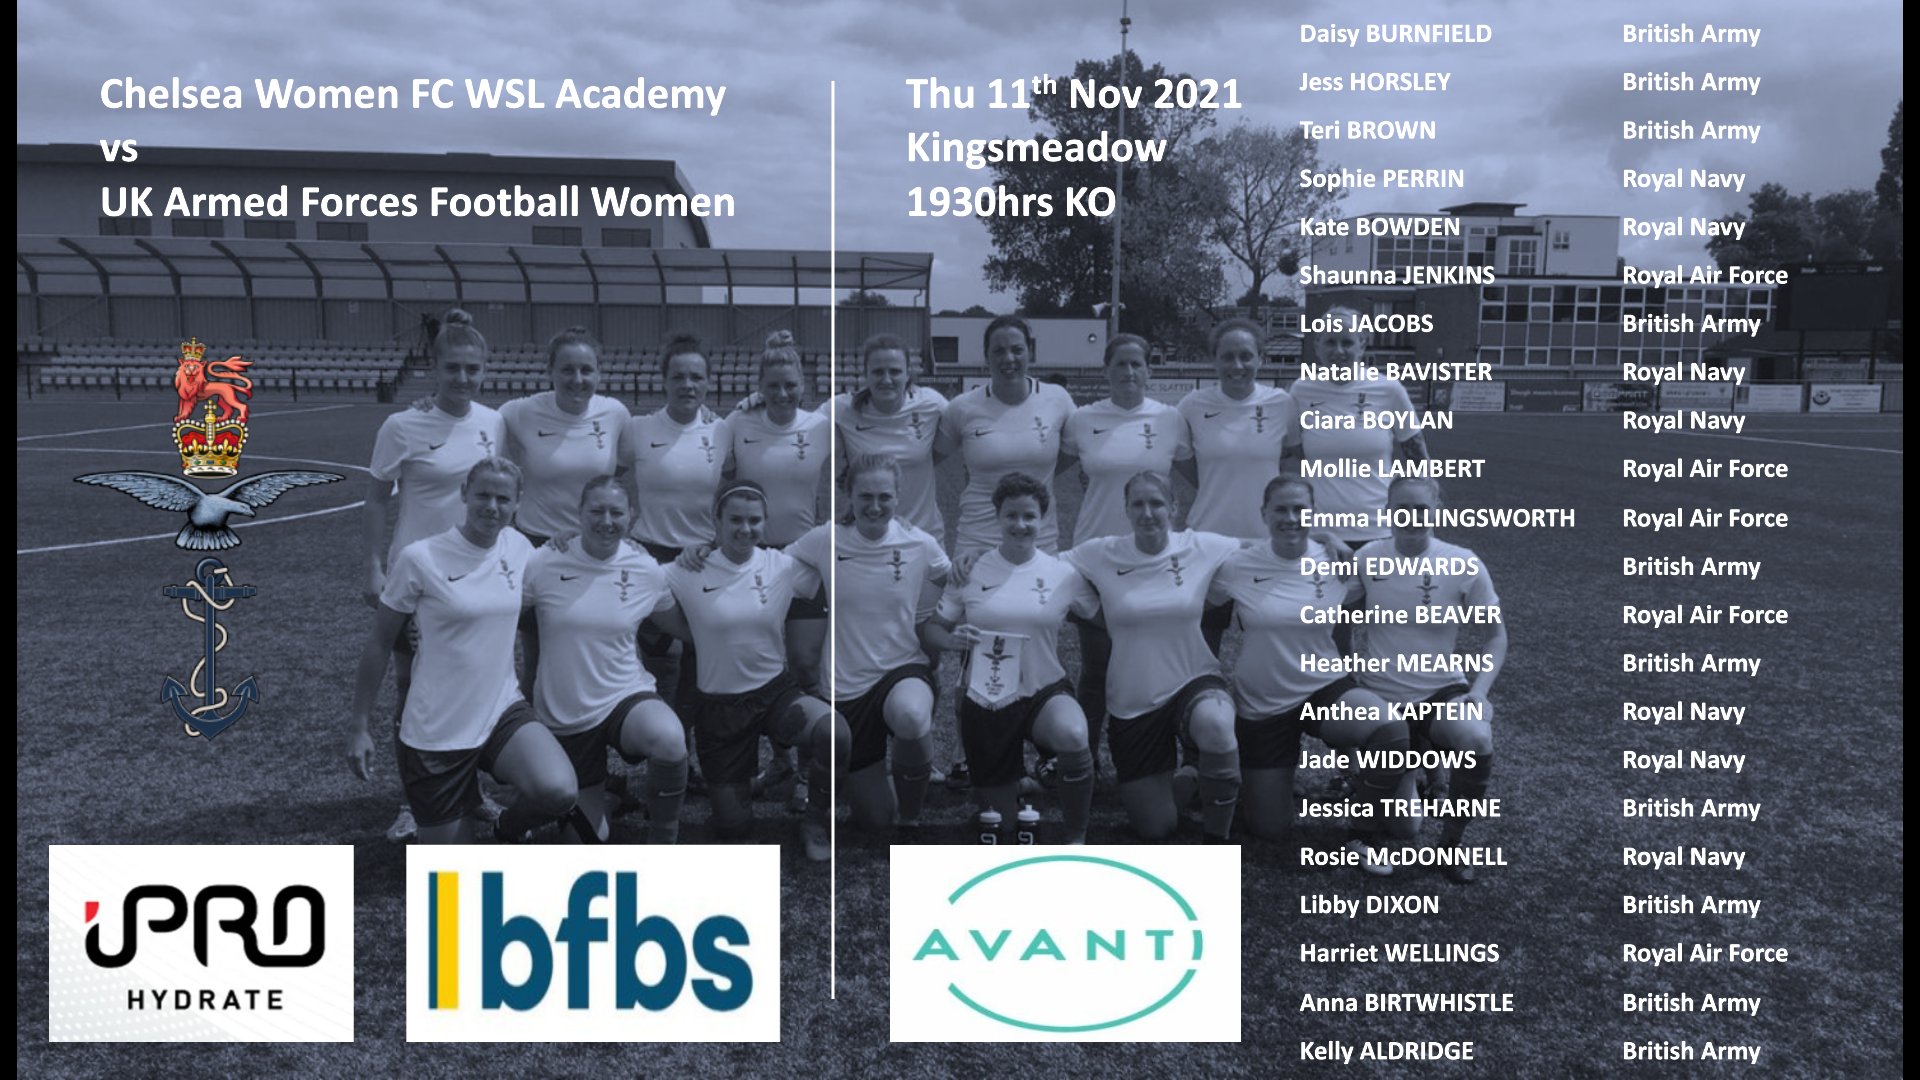 Football team and fixtures.